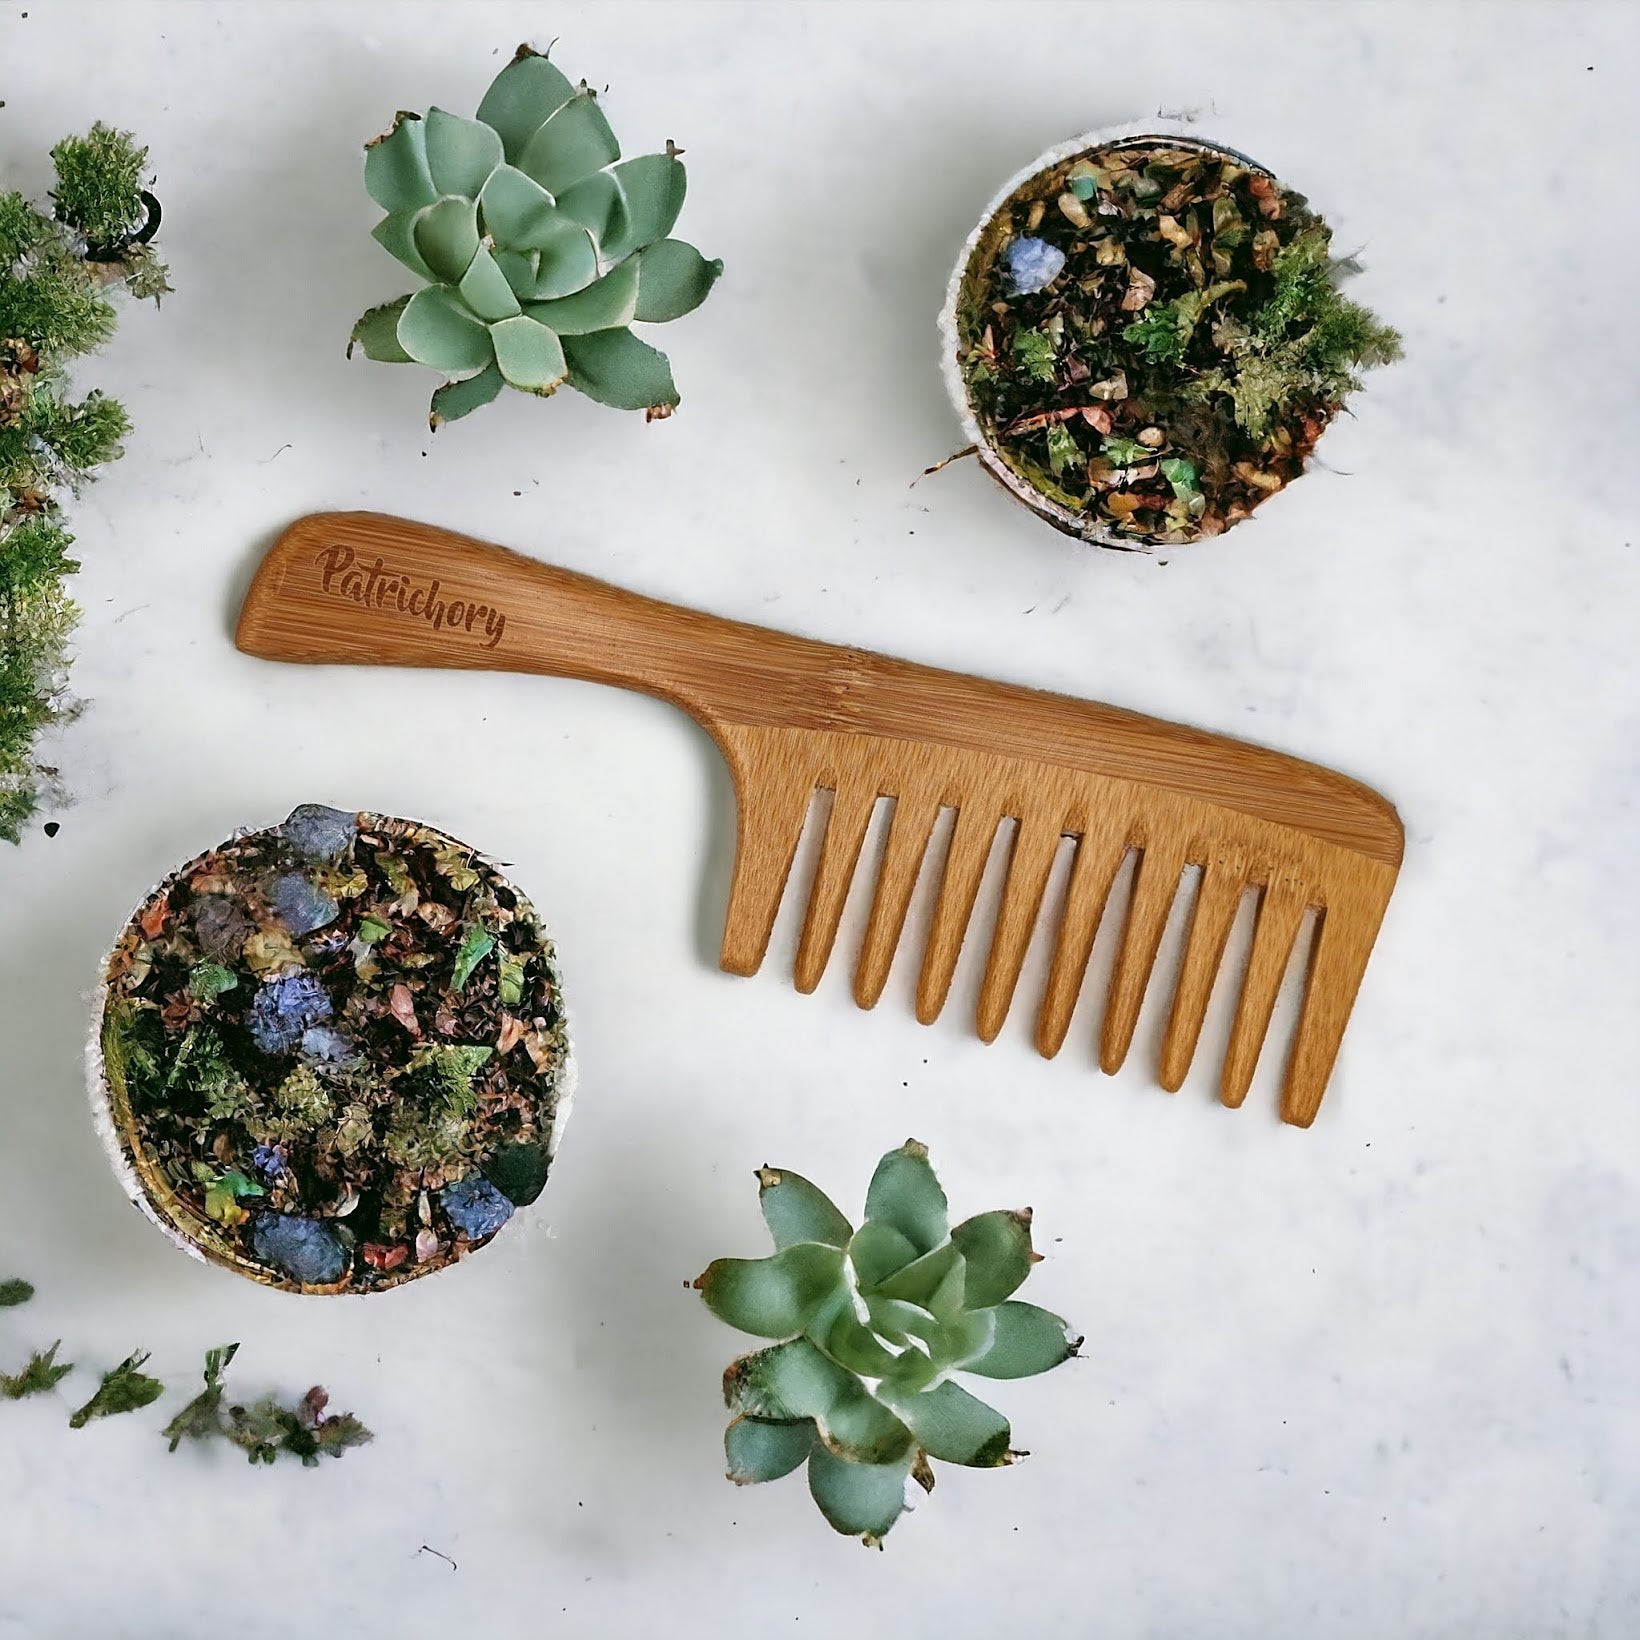 Patrichory Bamboo Comb with Handle | Haircare | The Green Collective SG